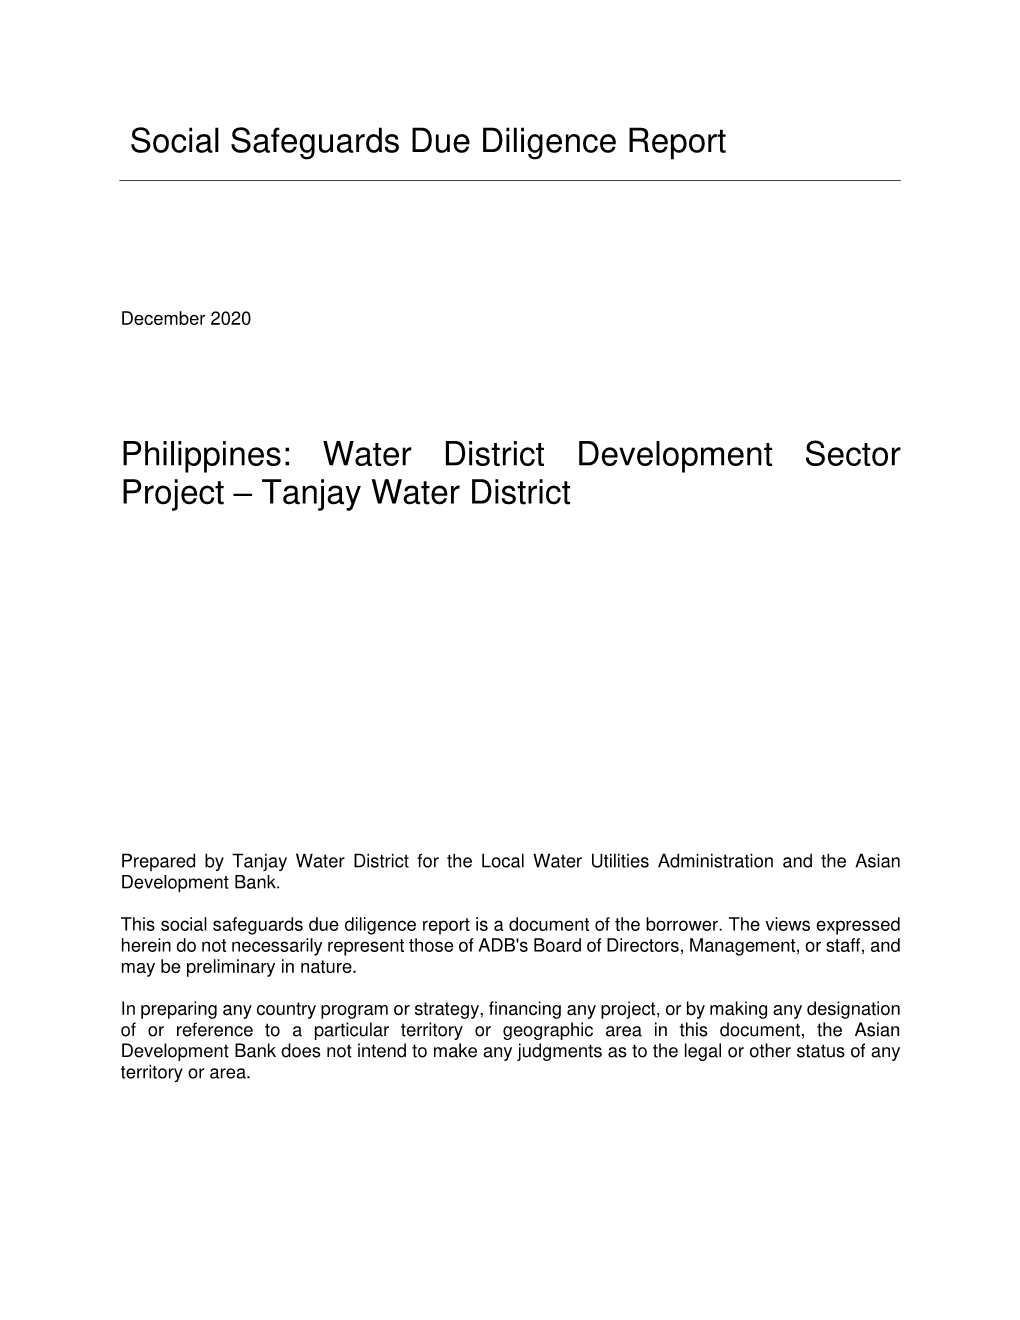 Water District Development Sector Project: Tanjay Water District